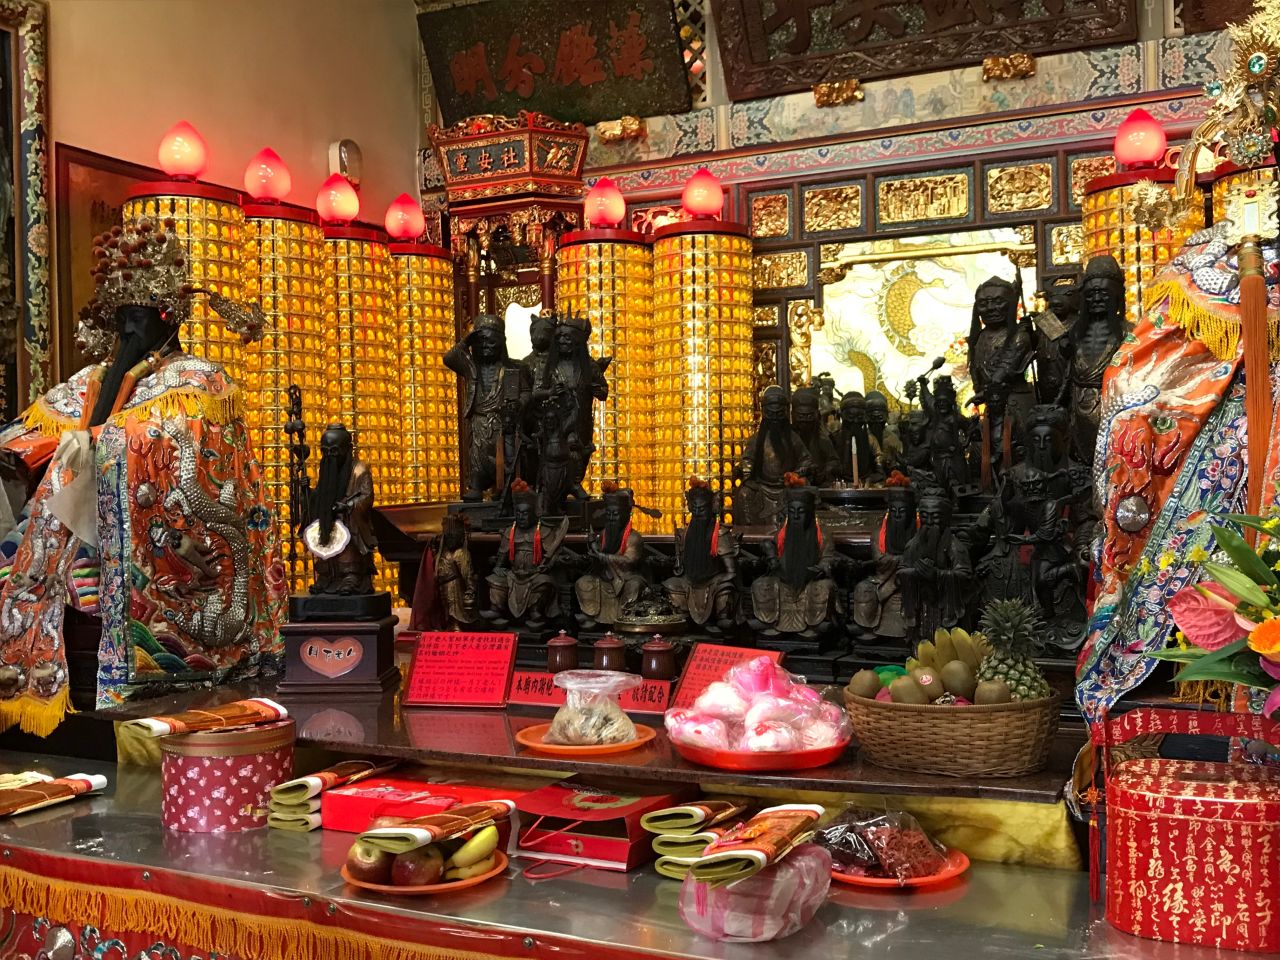 The Love God, or Yue Lao, is the second small statue from the left.